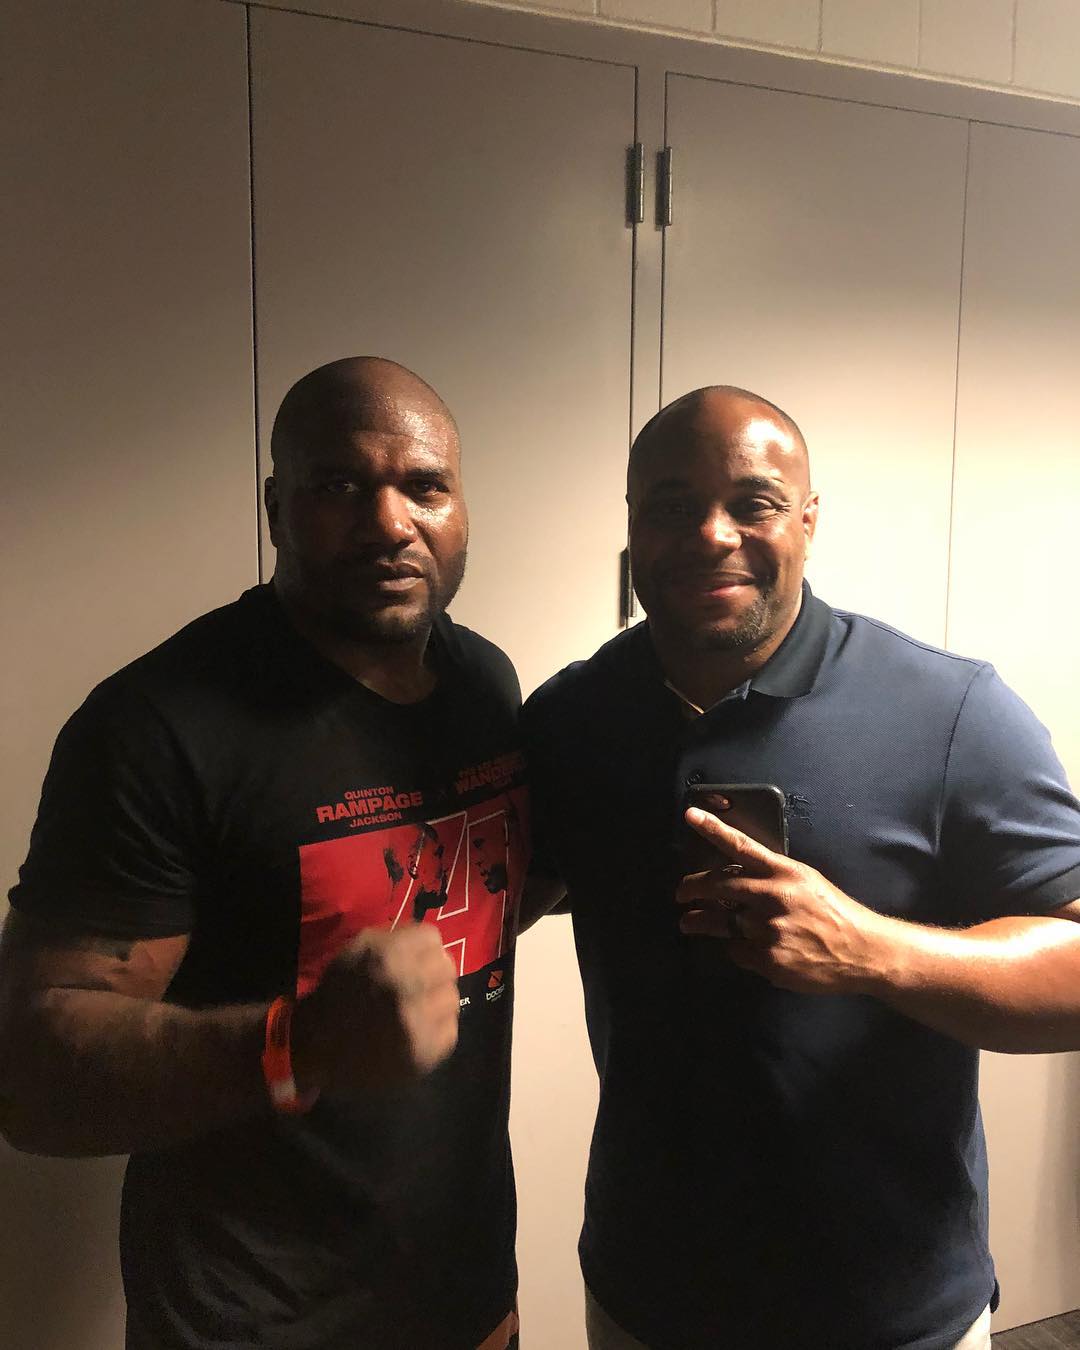 Quinton Jackson IG Post - Met the champ for the 1st time DC!!!